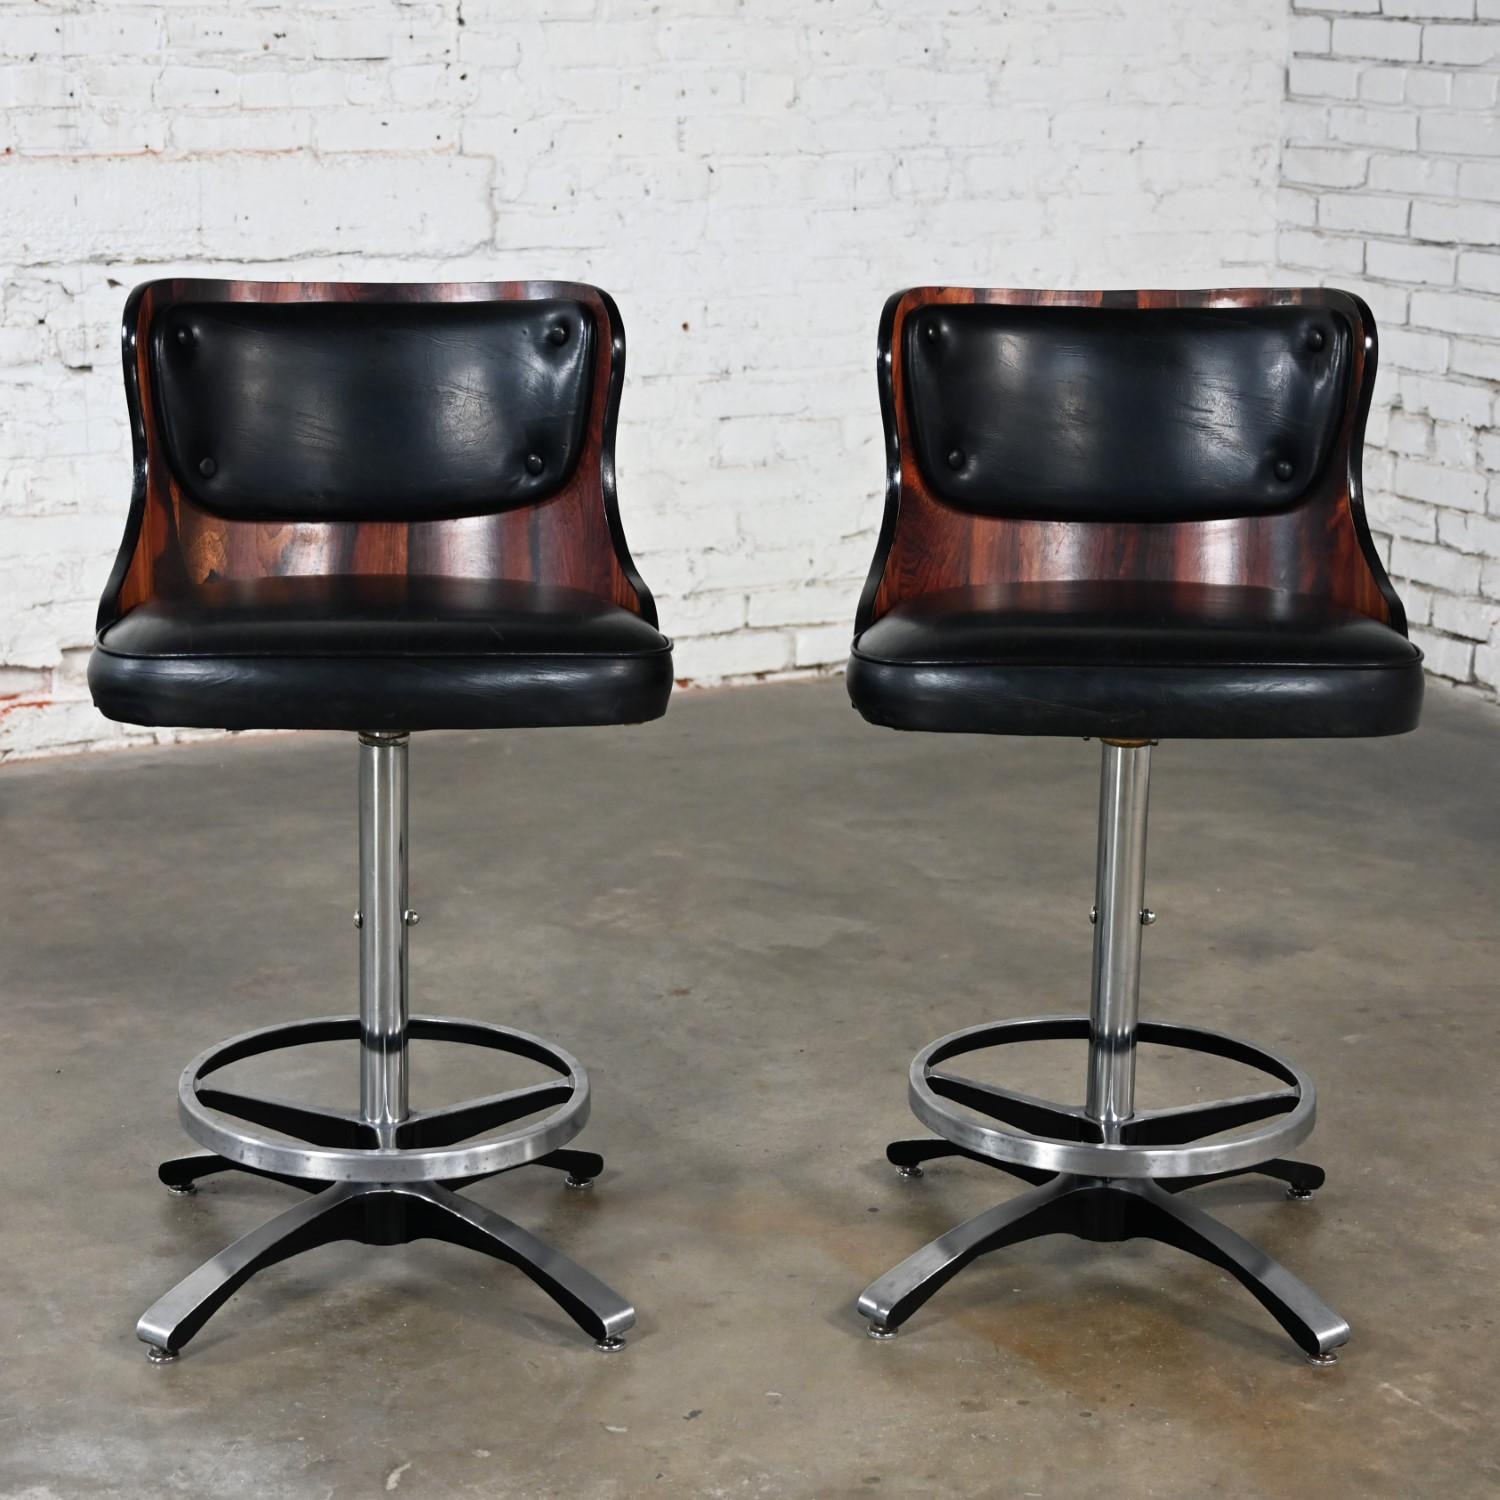 MCM Adjustable Swivel Barstools Black Vinyl & Laminate by Daystrom a Pair In Good Condition For Sale In Topeka, KS